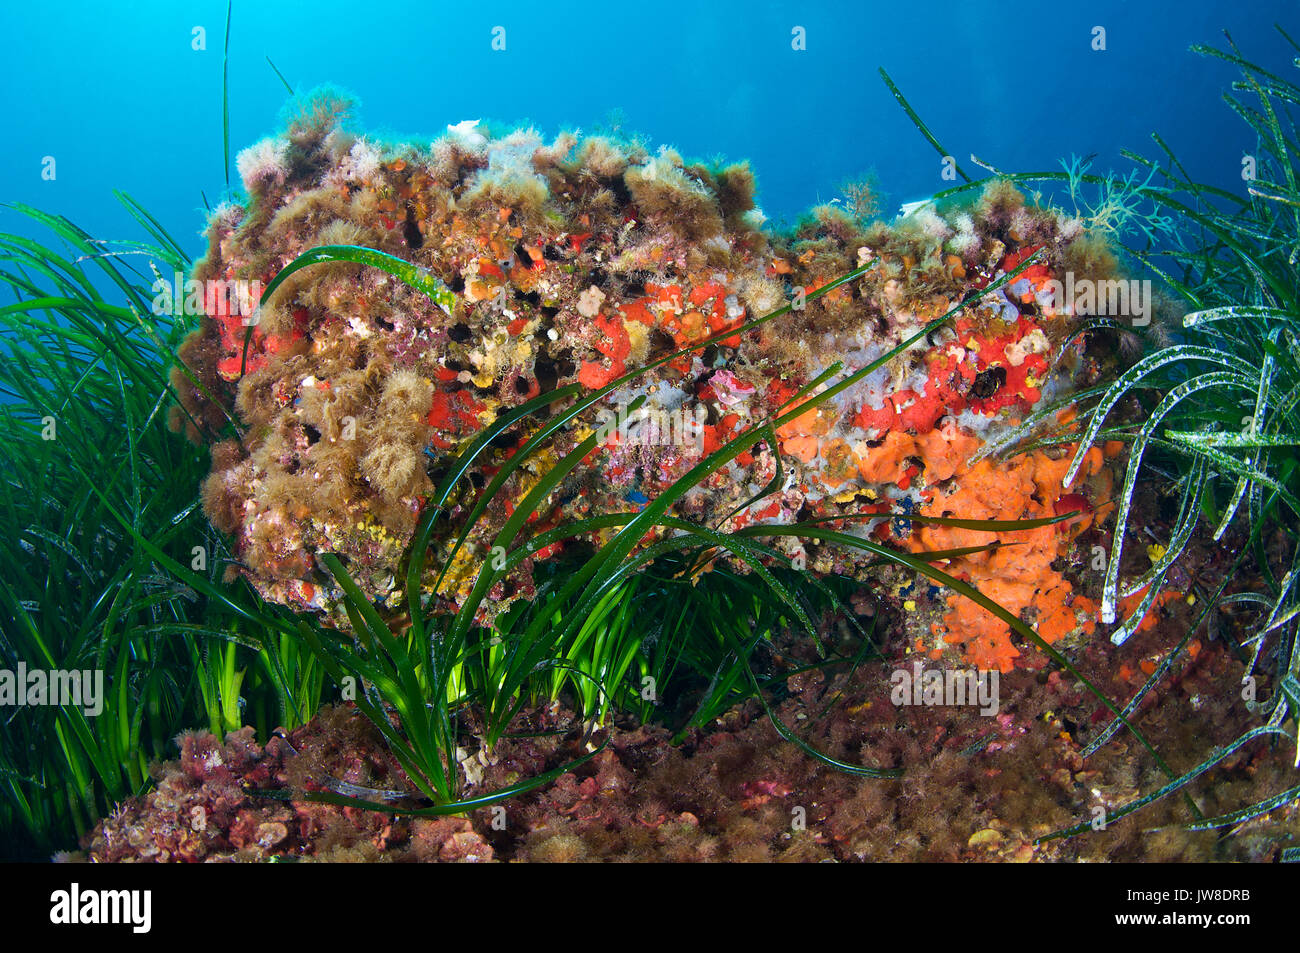 Reef with encrusting marine life among neptune seagrass (Posidonia oceanica) meadow in Ses Salines Natural Park (Formentera, Mediterranean sea, Spain) Stock Photo